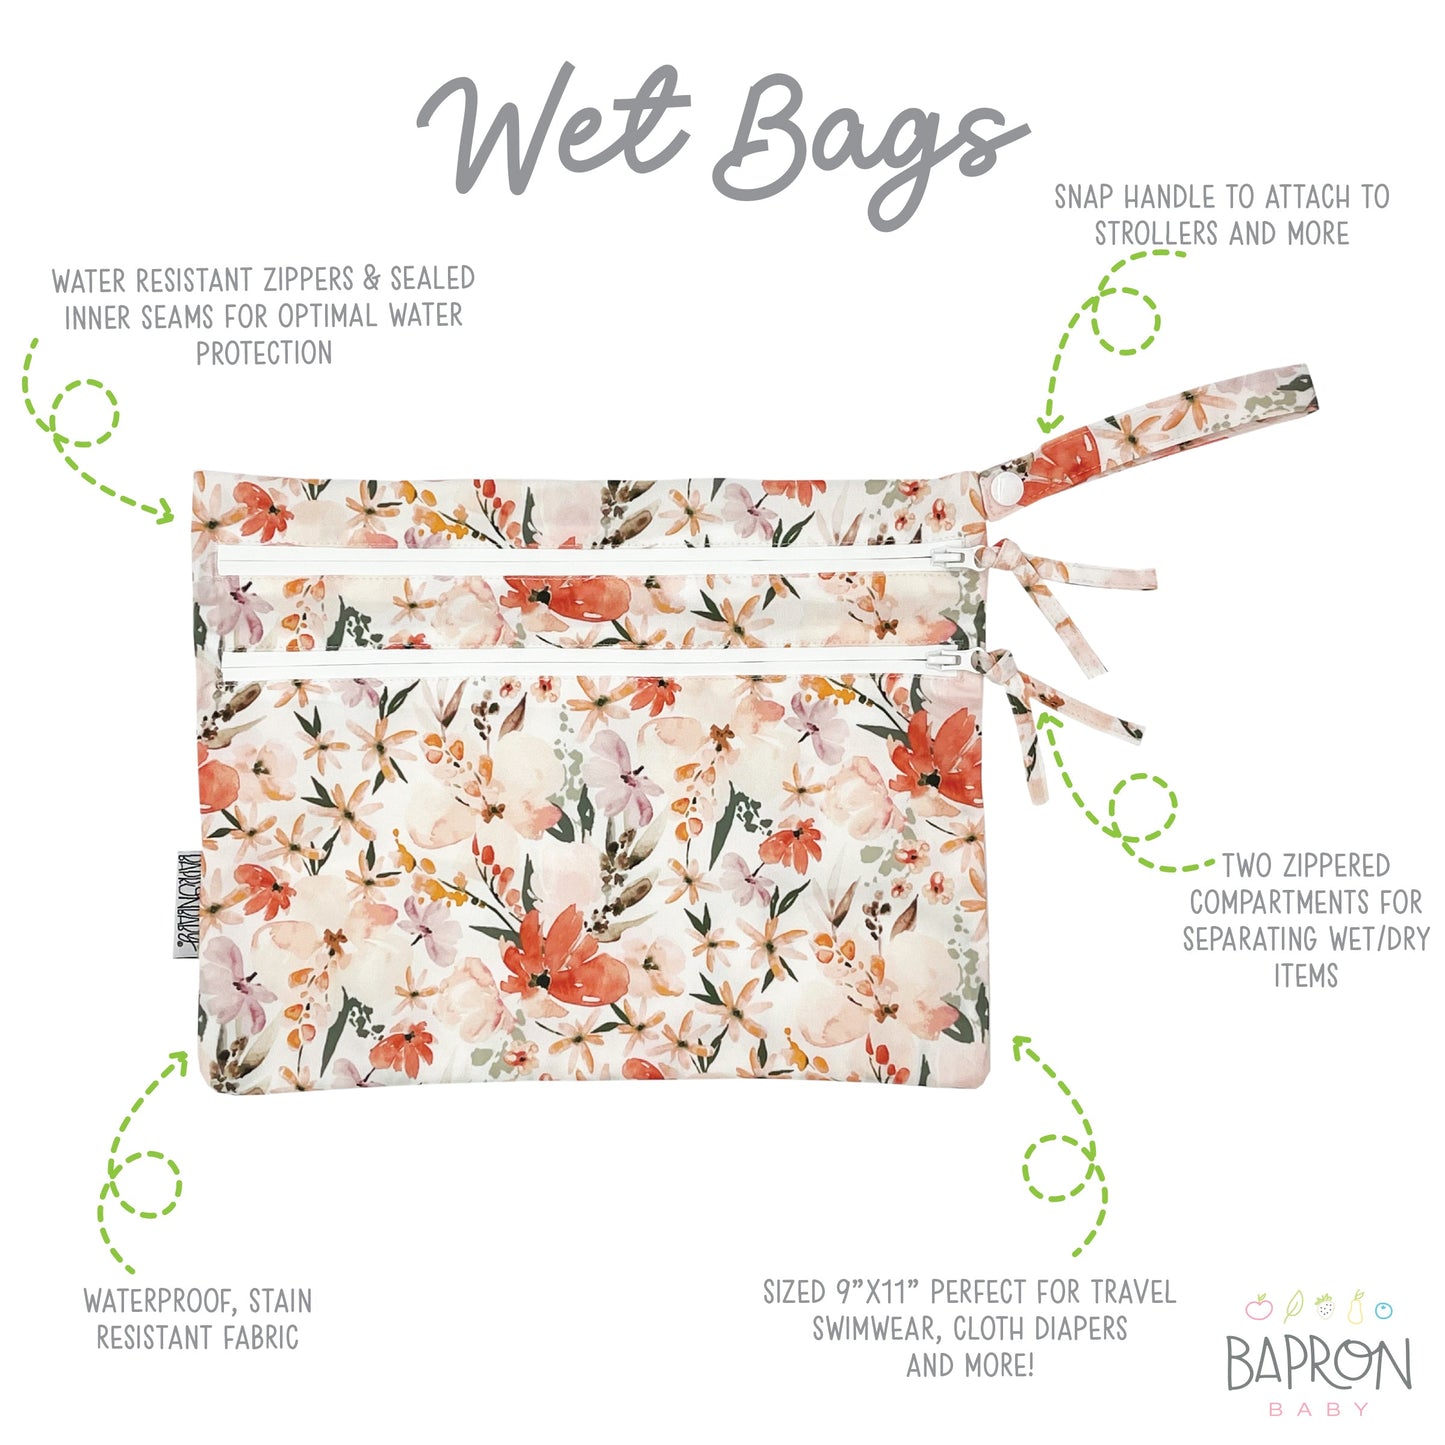 Peachy Dreams - Waterproof Wet Bag (For mealtime, on-the-go, and more!) - WERONE